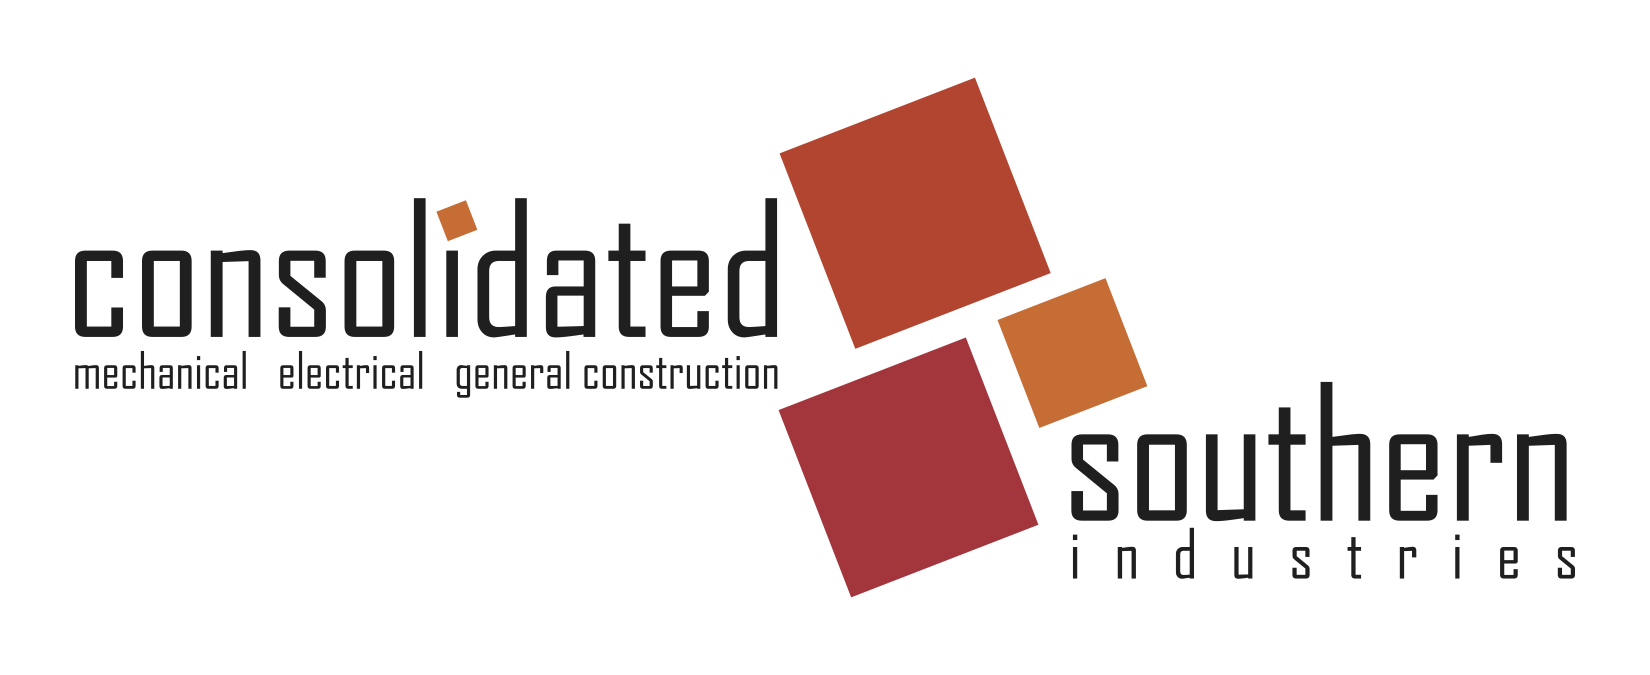 consolidated southern logo